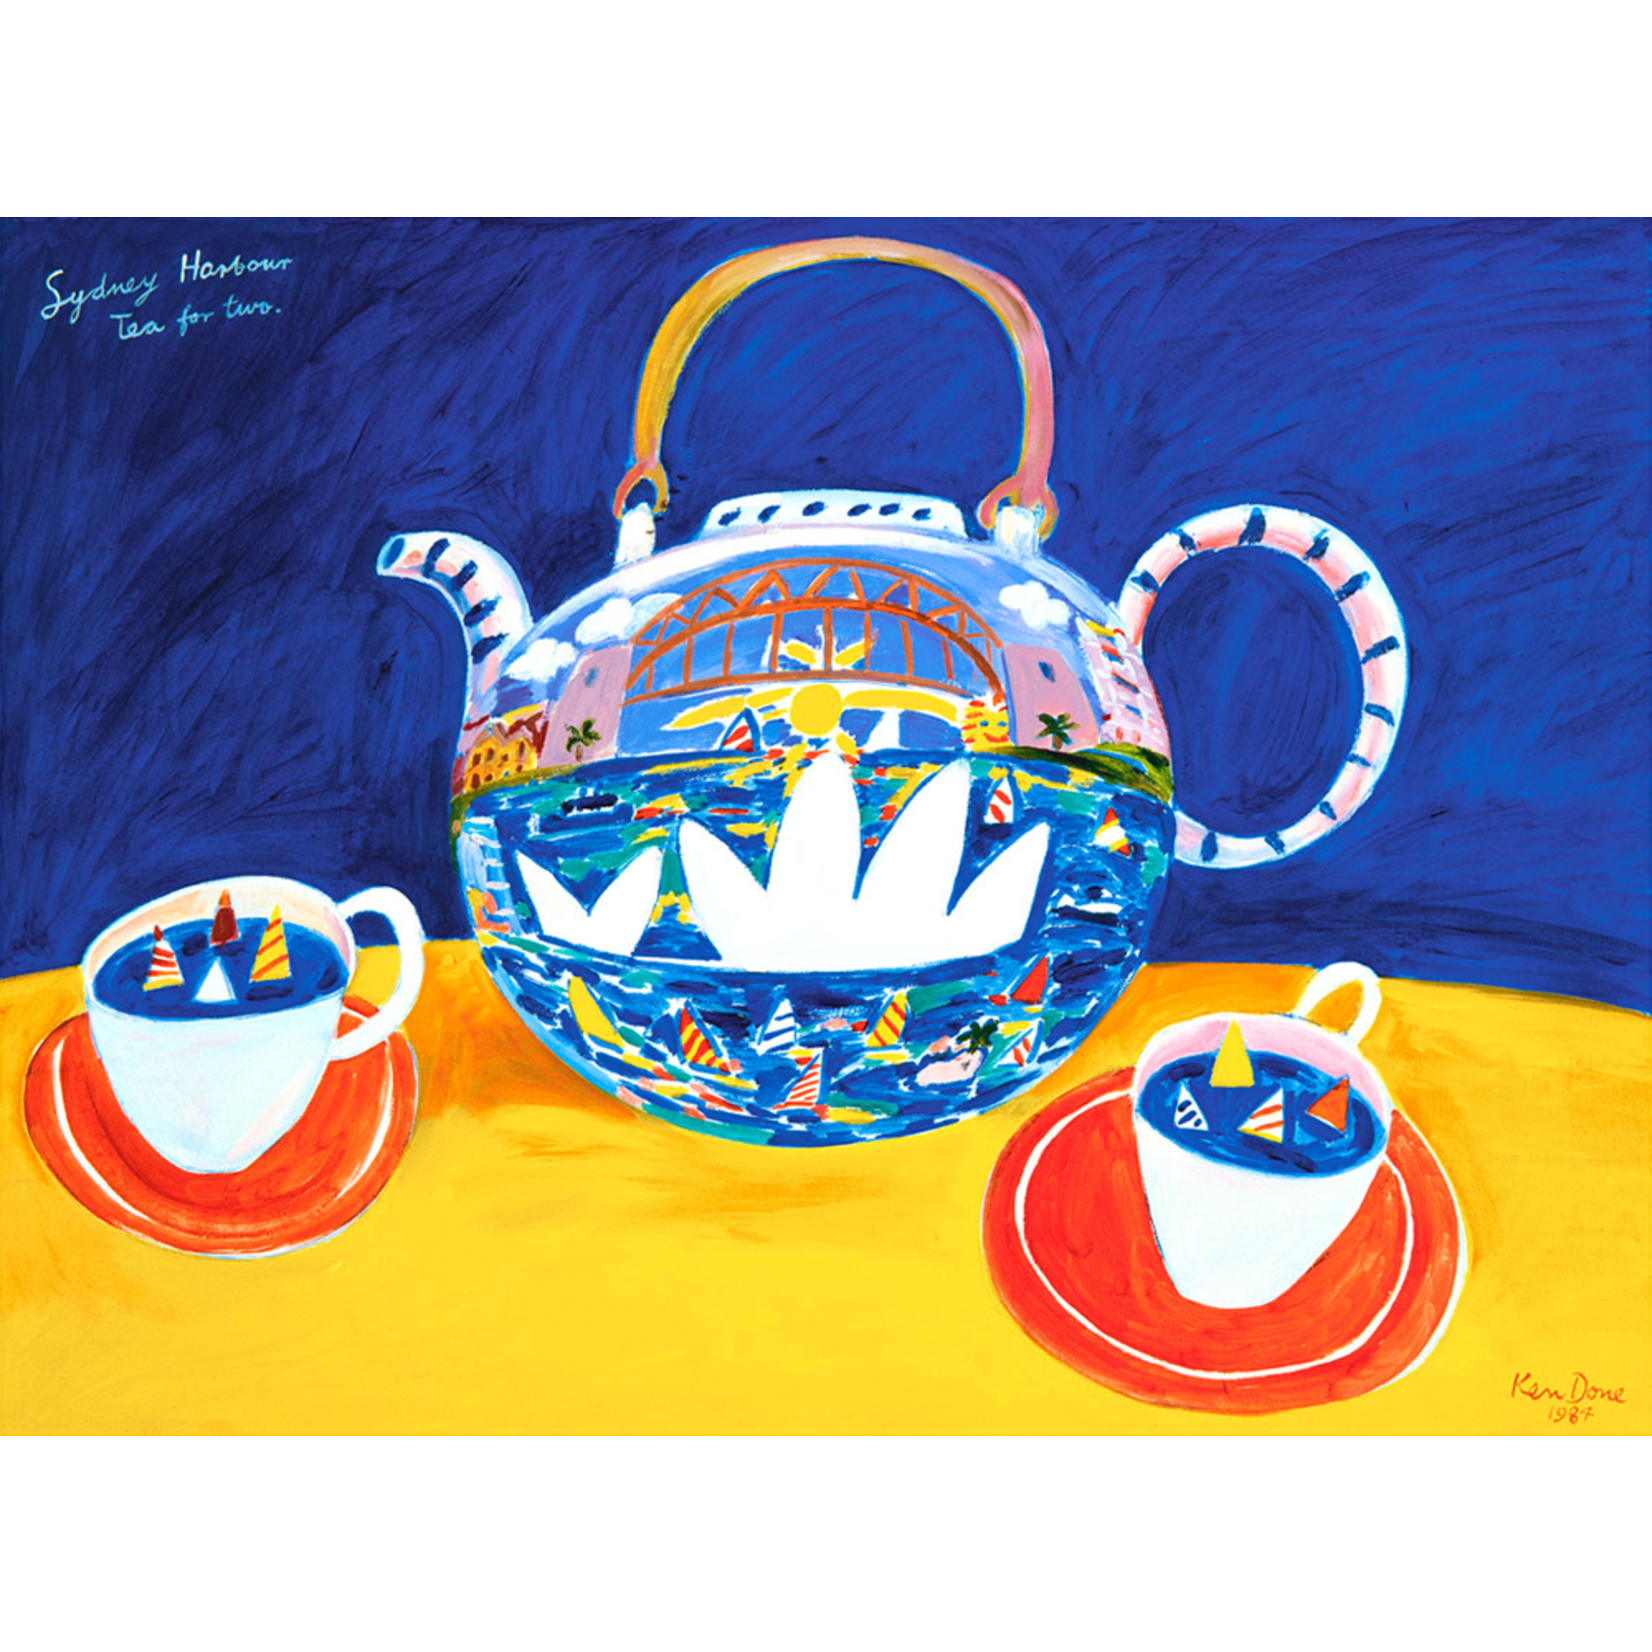 Limited Edition Prints Sydney Harbour, tea for two, 1984